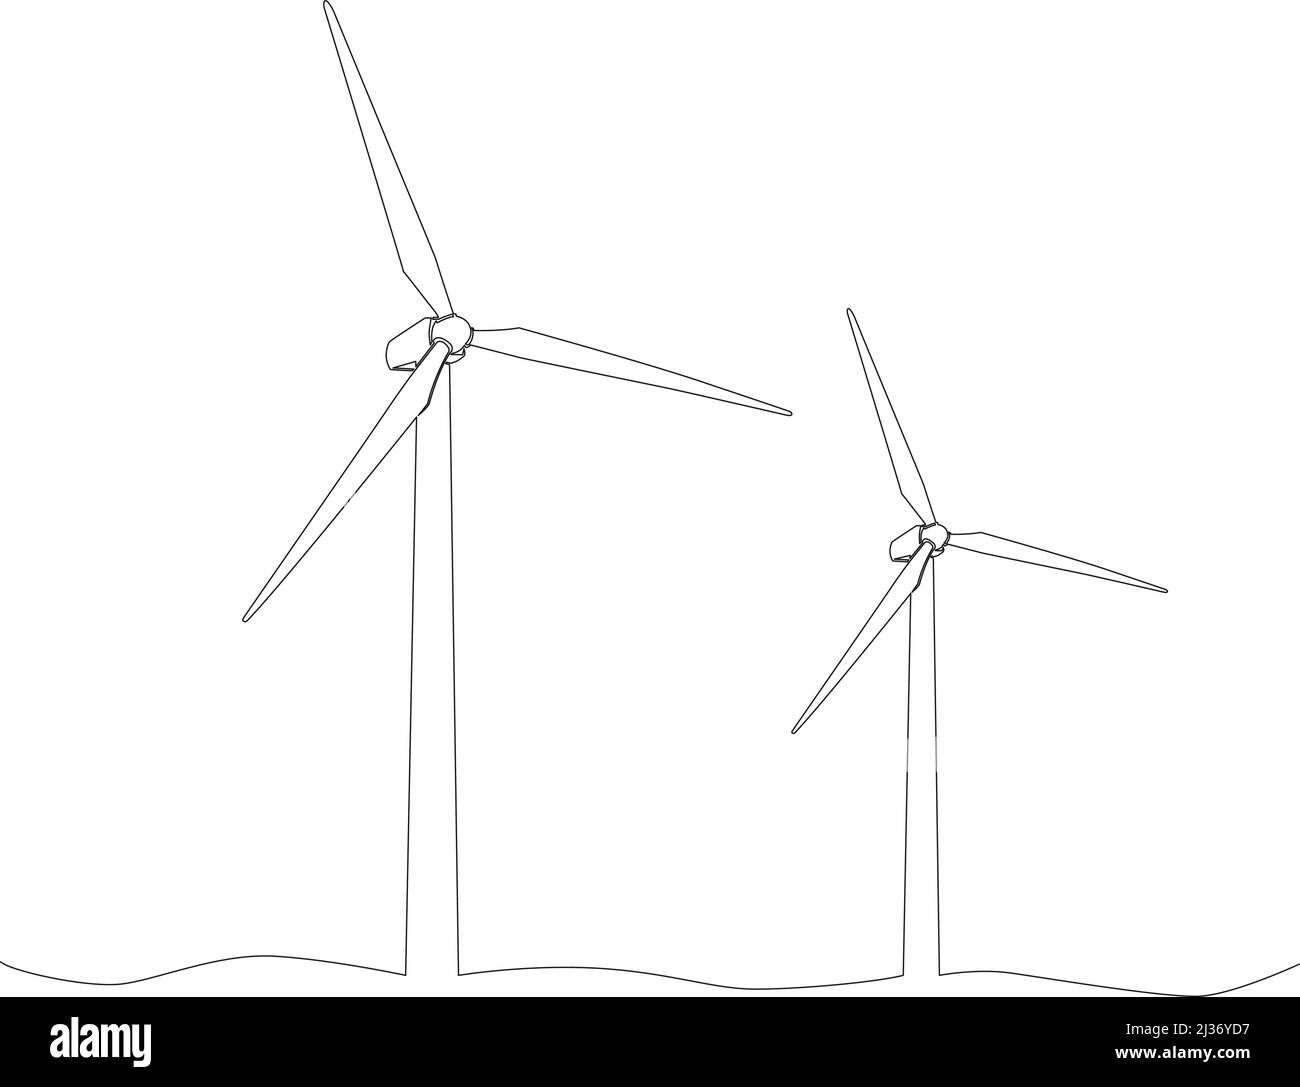 single line drawing of wind turbines isolated on white background, continuous line hand-drawn vector illustration Stock Vector